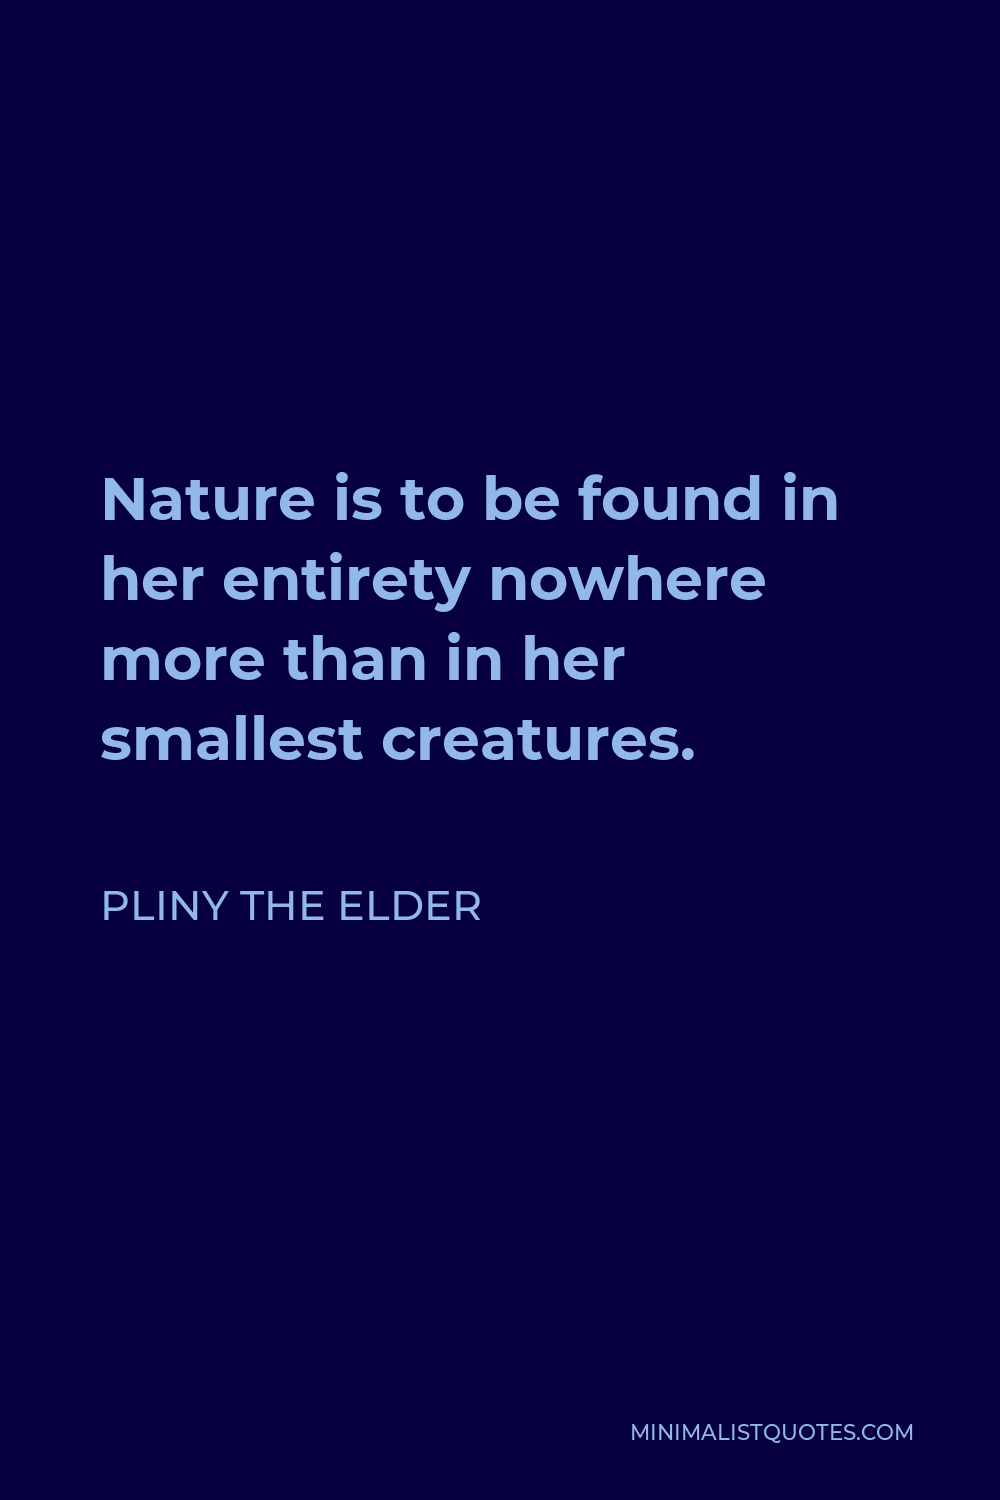 Pliny the Elder Quote - Nature is to be found in her entirety nowhere more than in her smallest creatures.